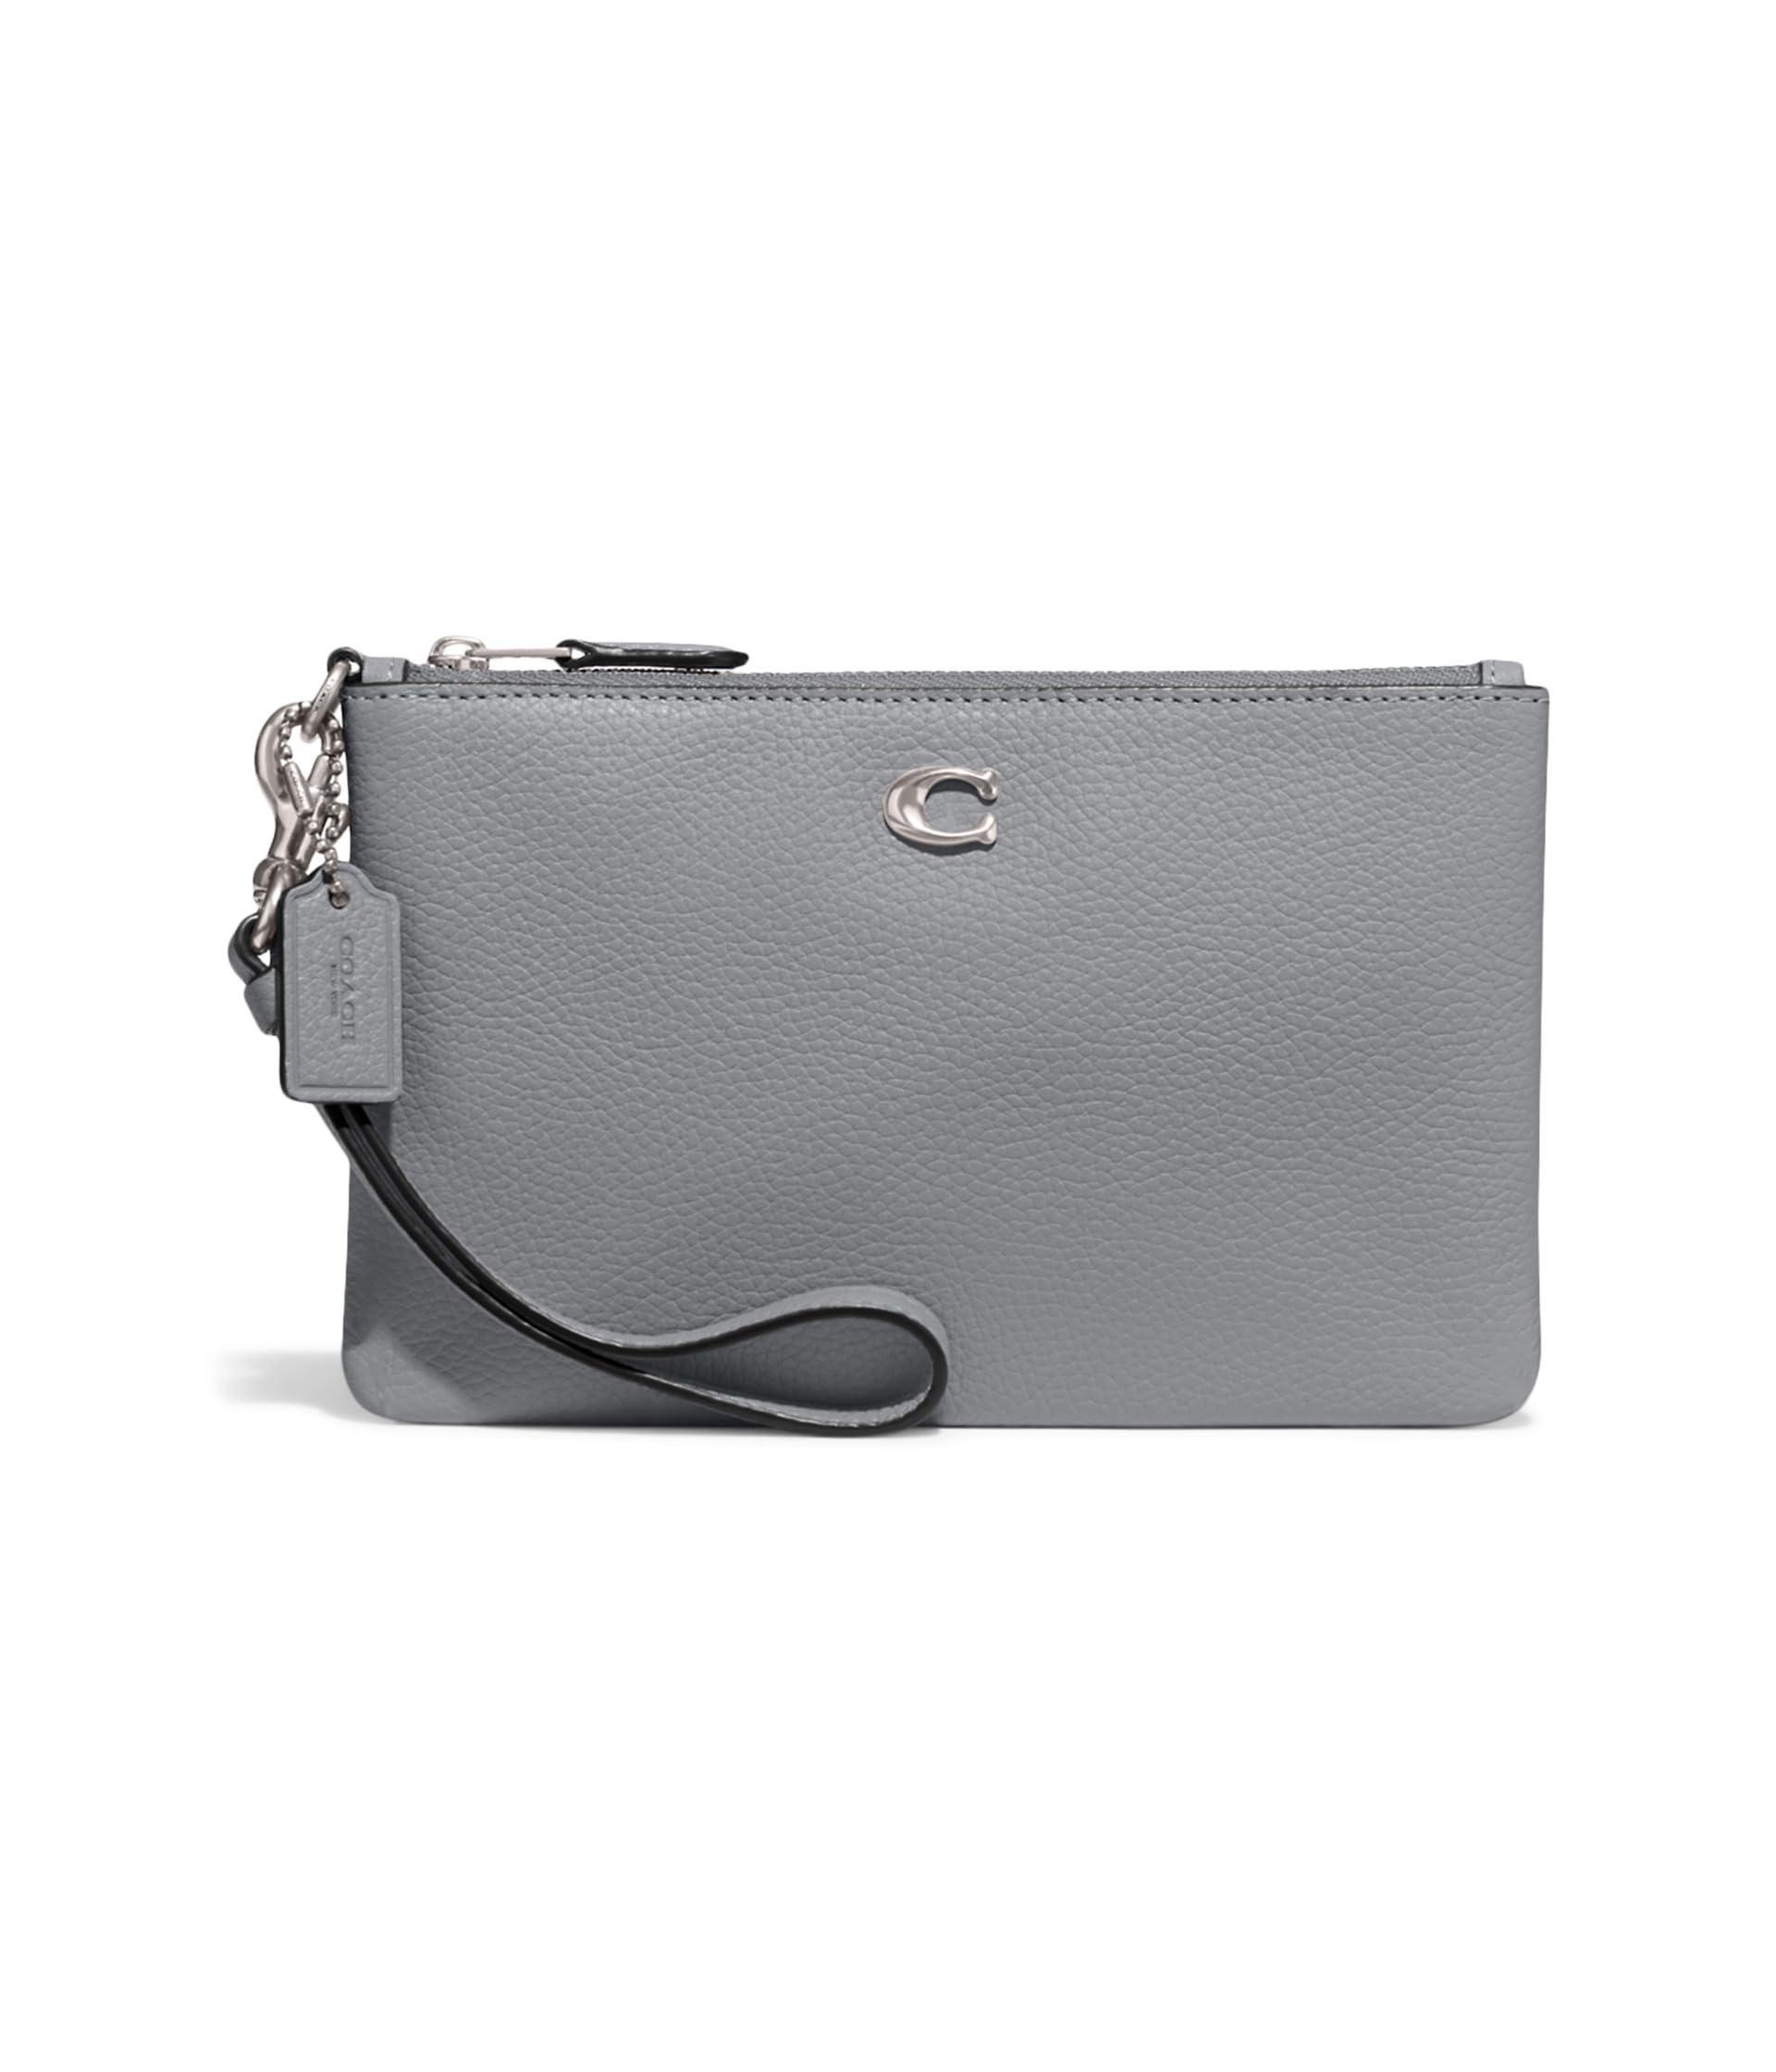 COACH Polished Pebble Leather Small Wristlet in Gray